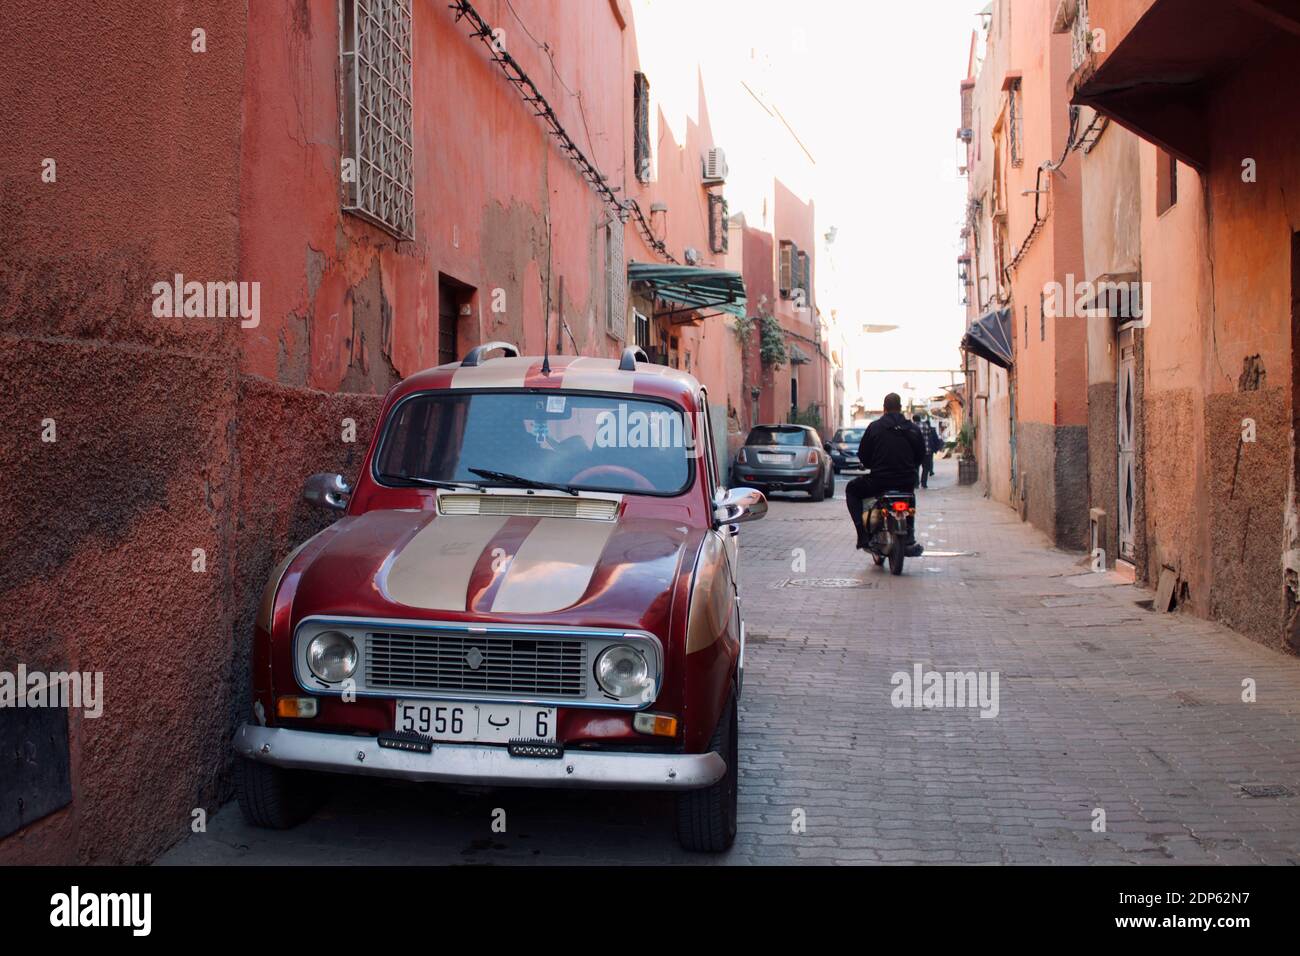 Marrakech, Morocco - February 16 2020: Daily life in an street of Marrakech, old car in Morocco Stock Photo